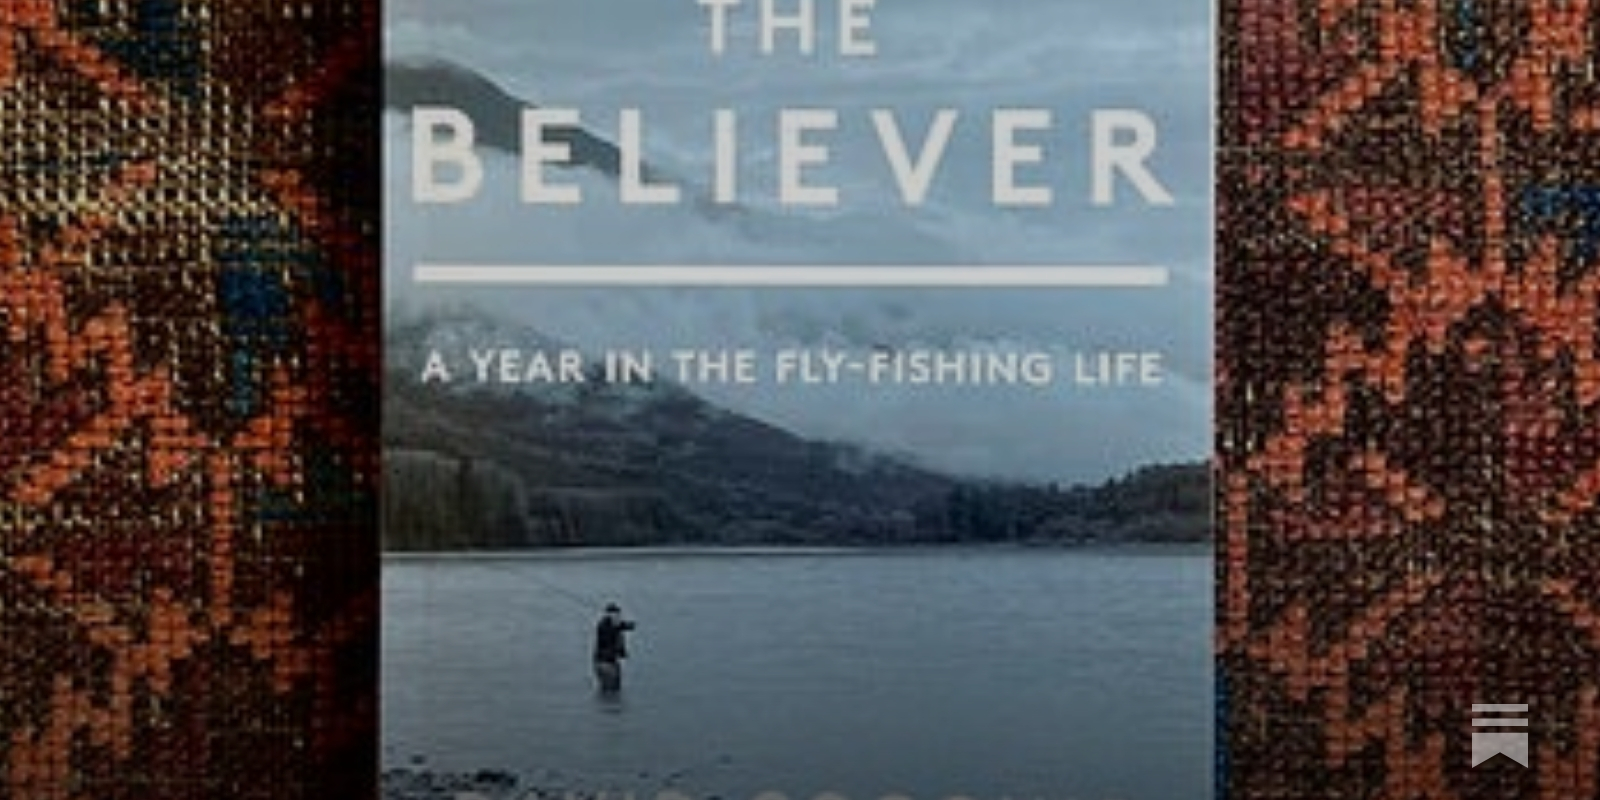 The Believer - by David Coggins - The Contender